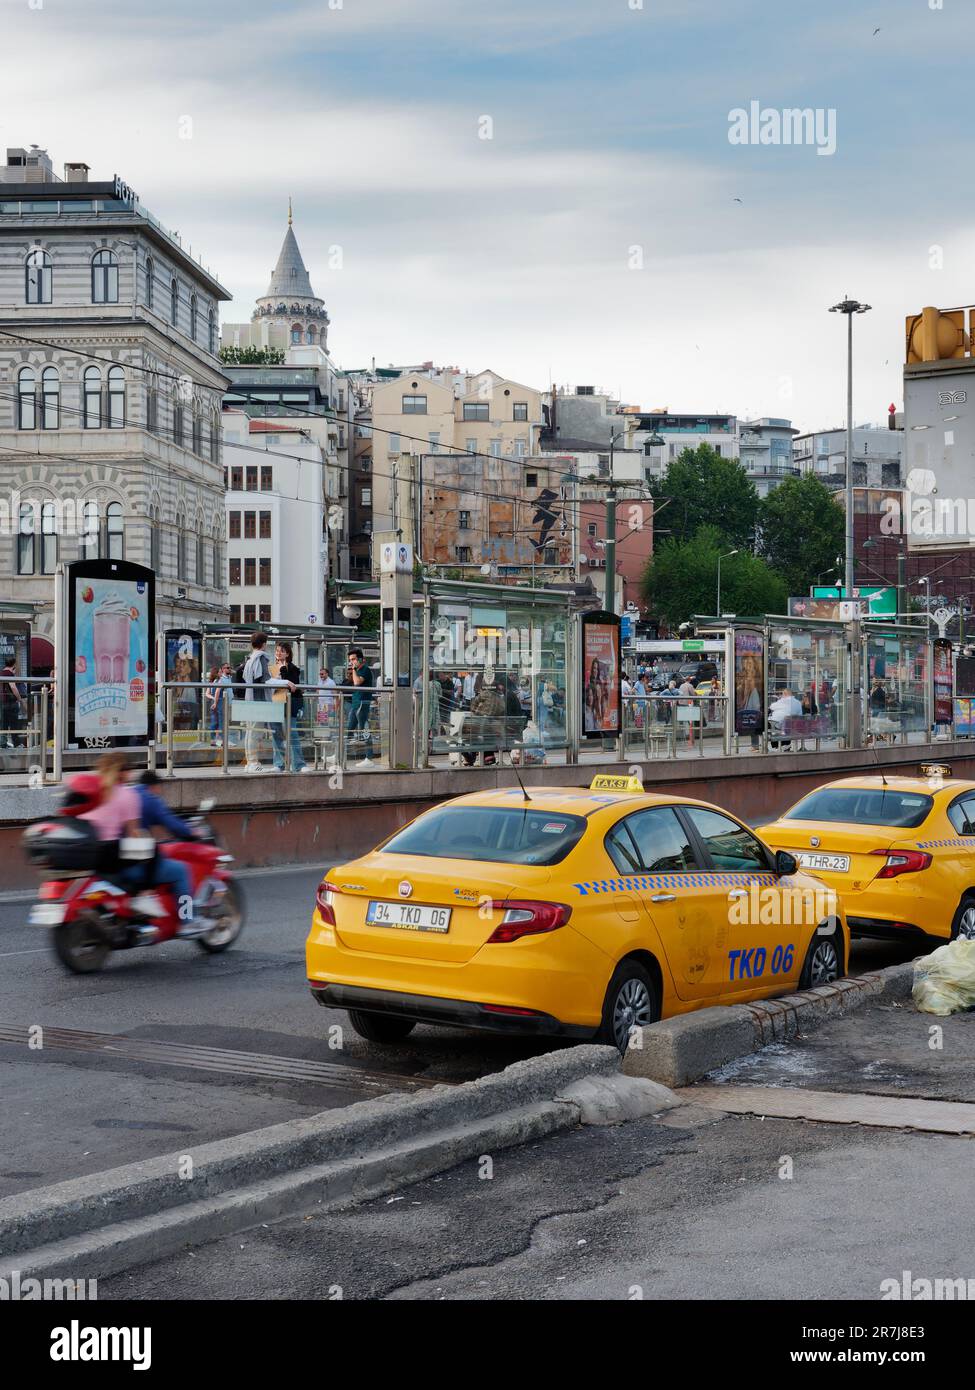 Yellow taxis on Galata Bridge as a motorbike speeds past. People wait at Karakoy Tram stop. Galata Tower in background. Istanbul, Turkey. Stock Photo